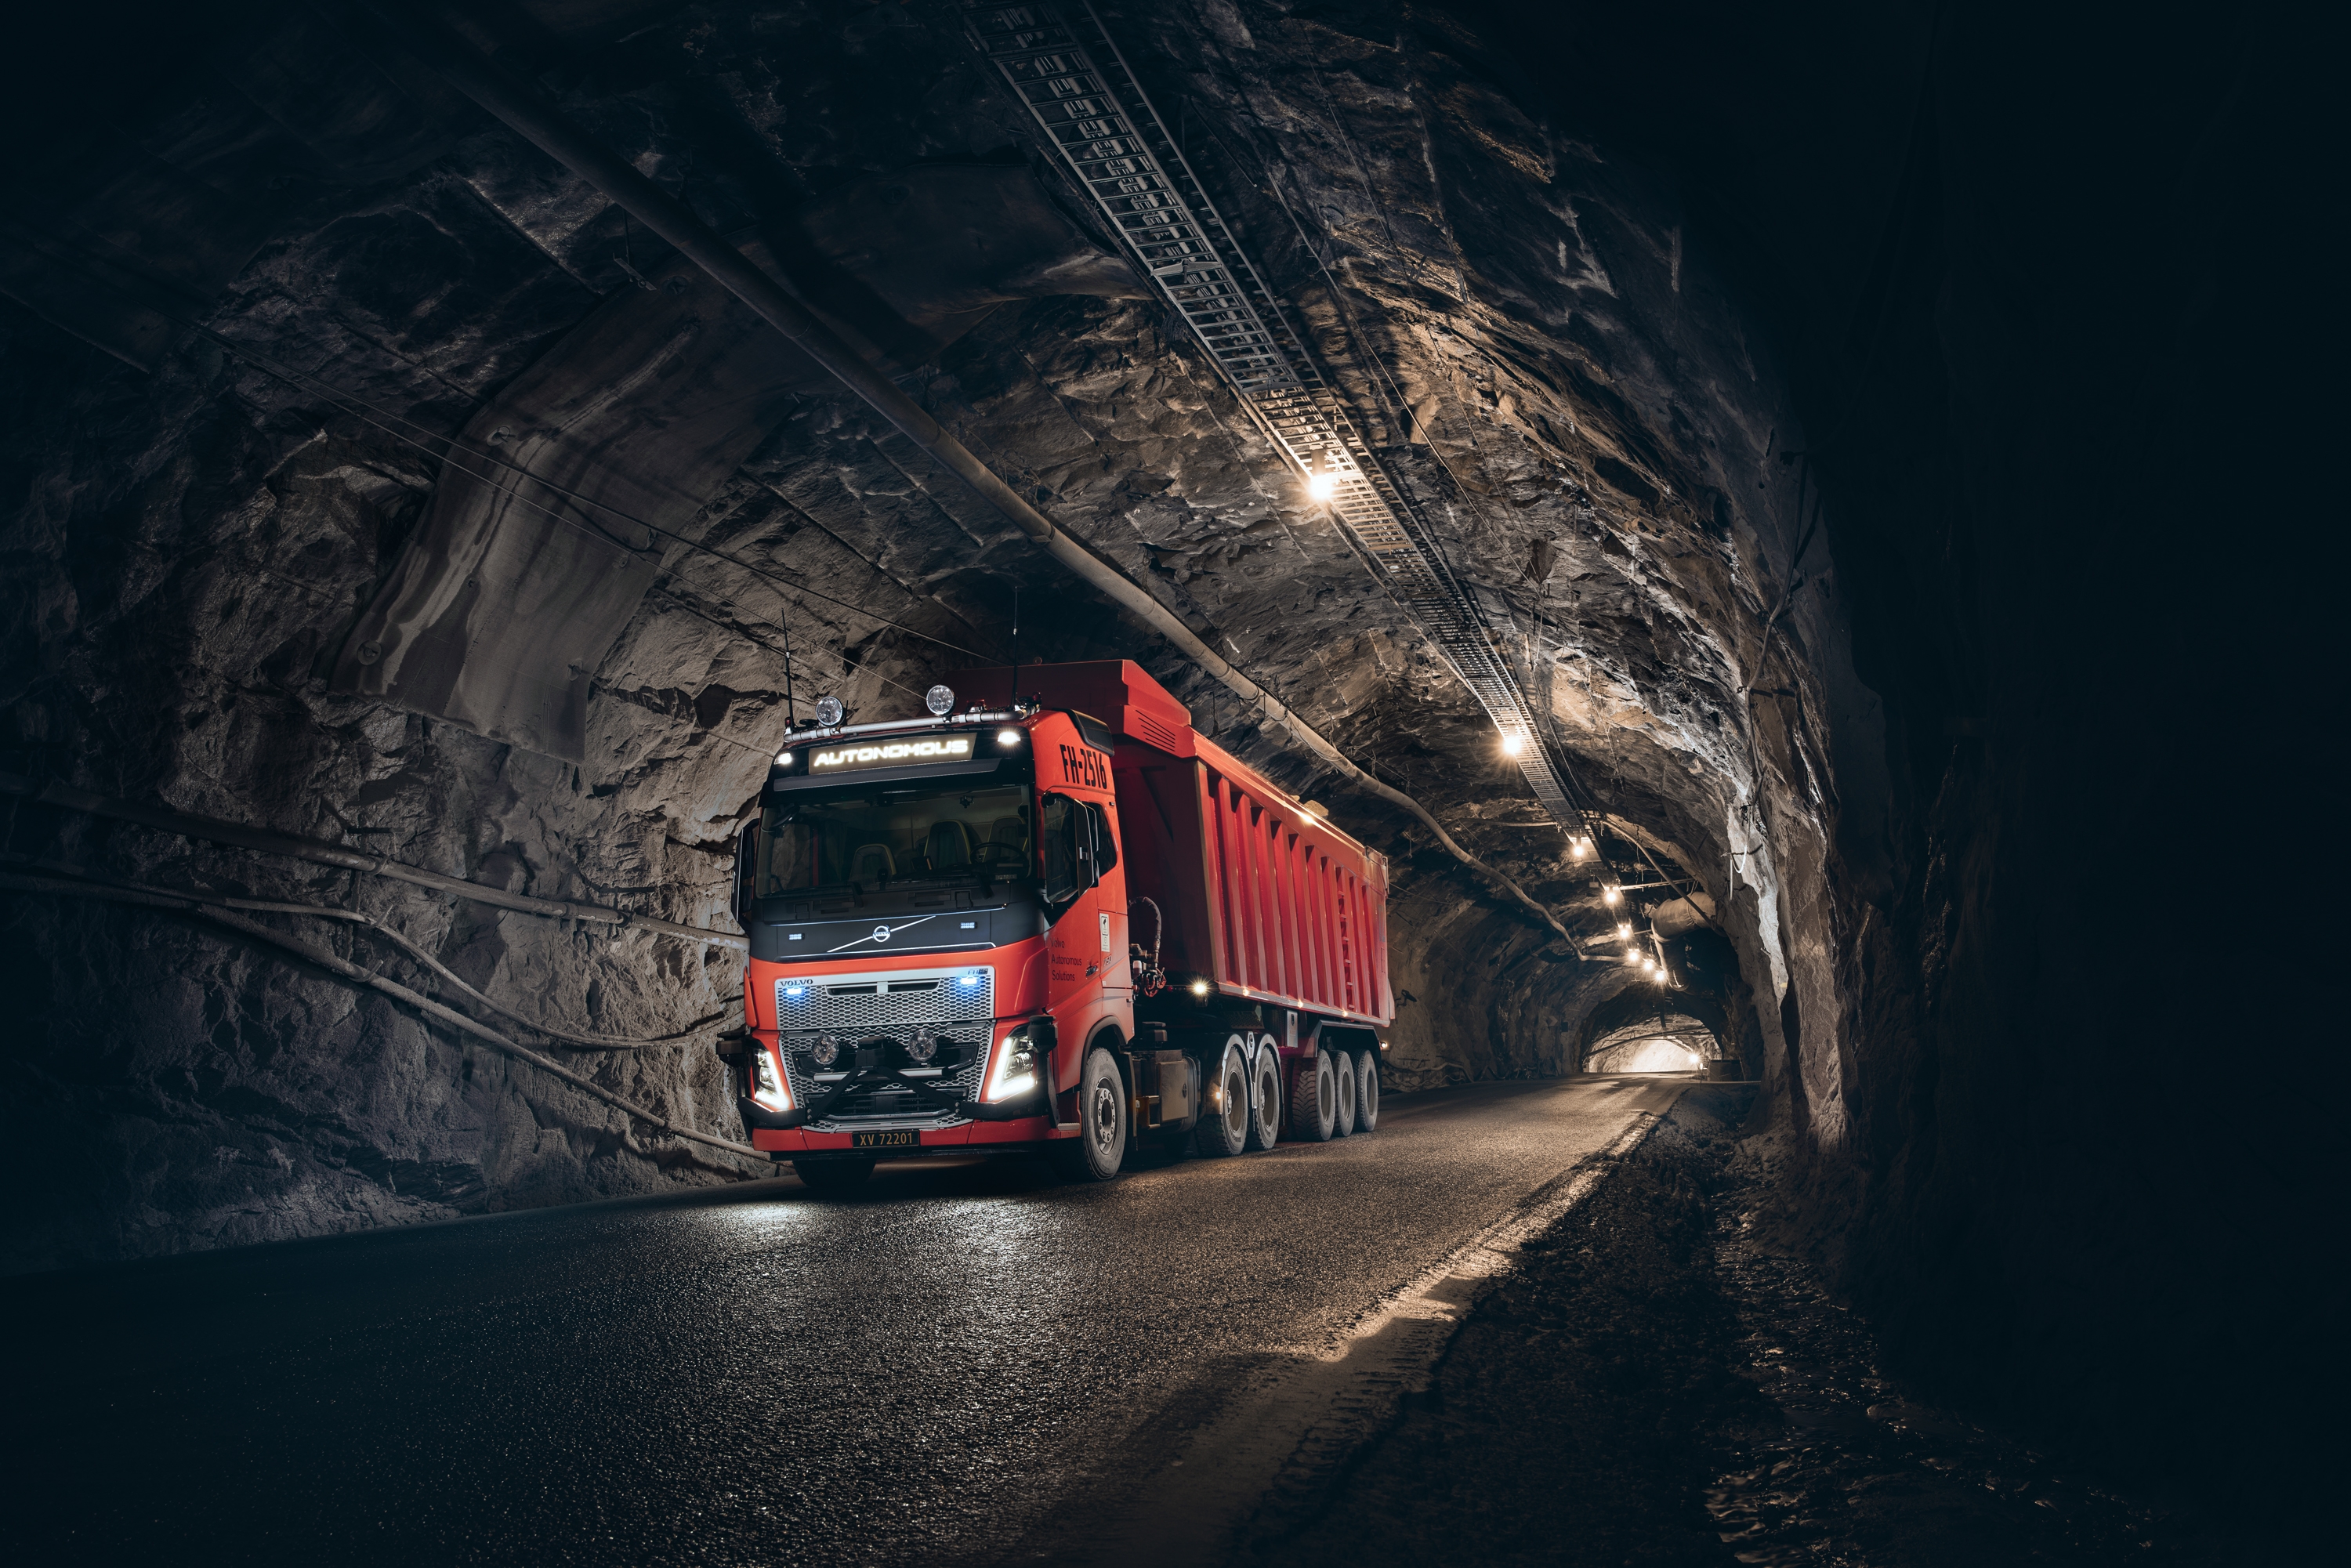 Volvo Trucks - The Volvo FMX is one of the most robust